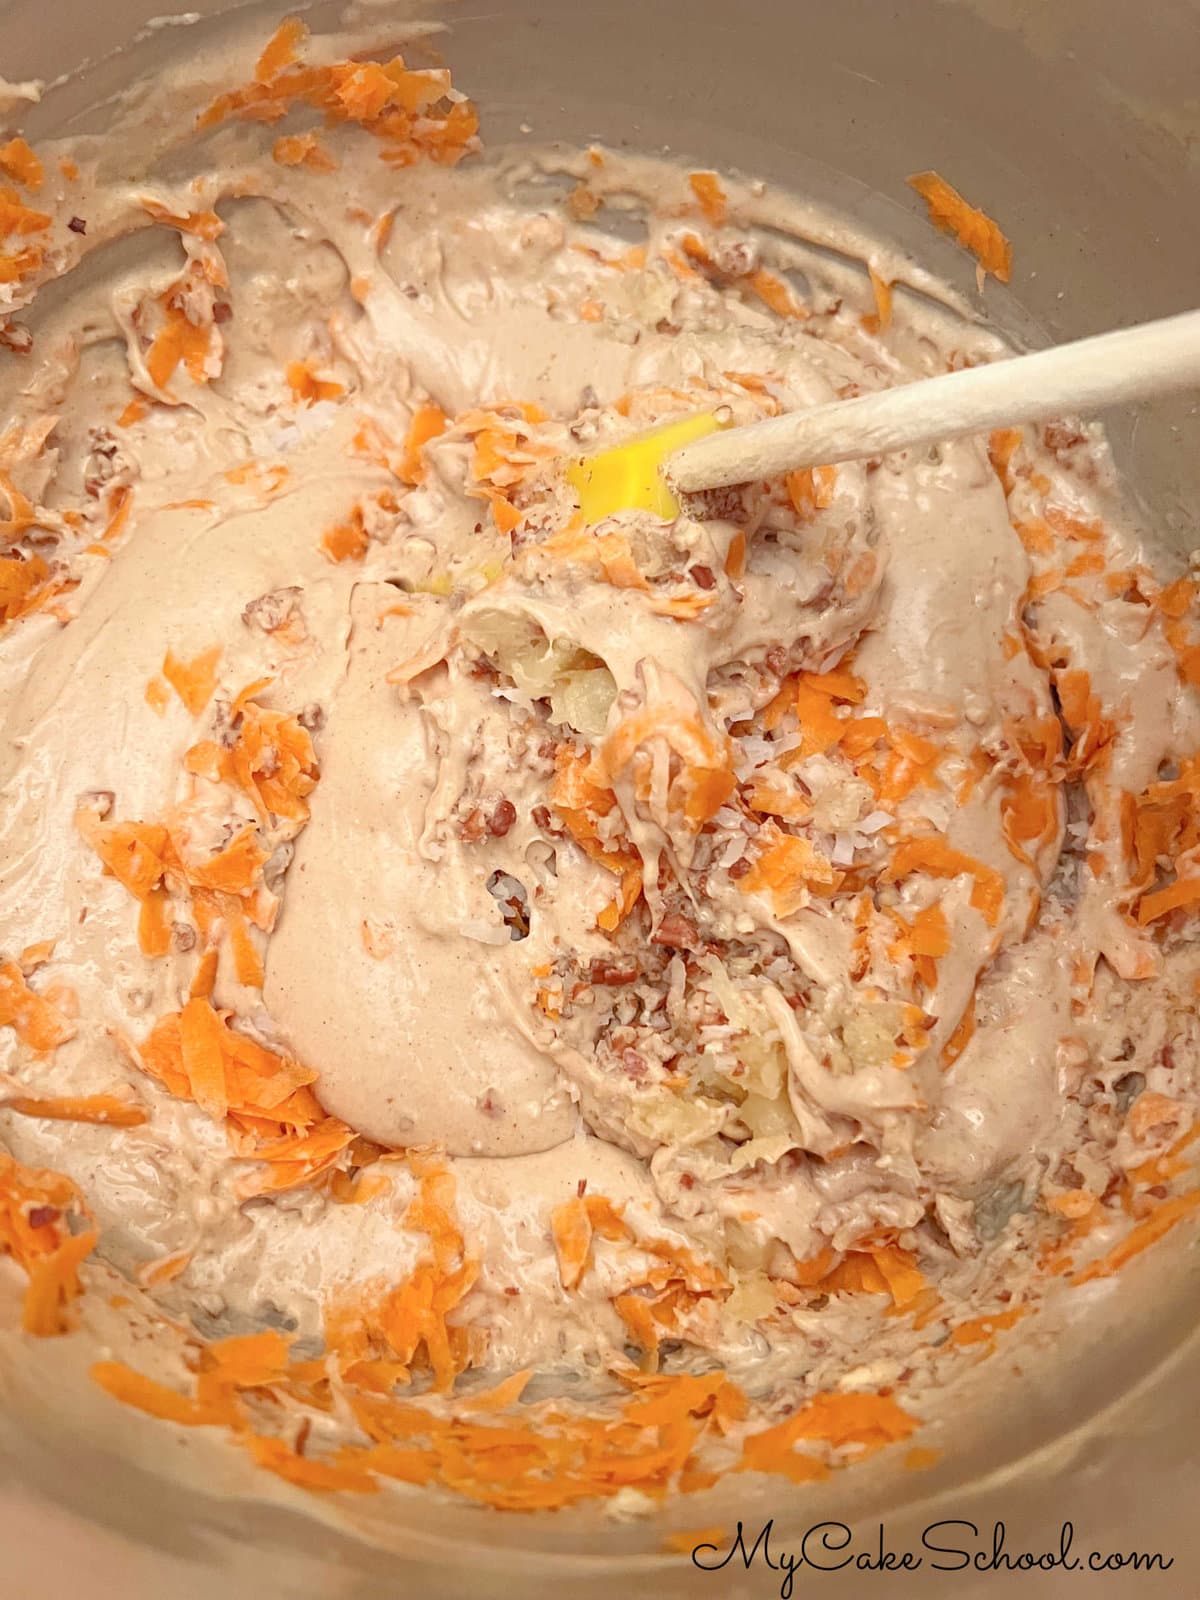 Folding carrots, coconut, pecans, and pineapple into the cake batter